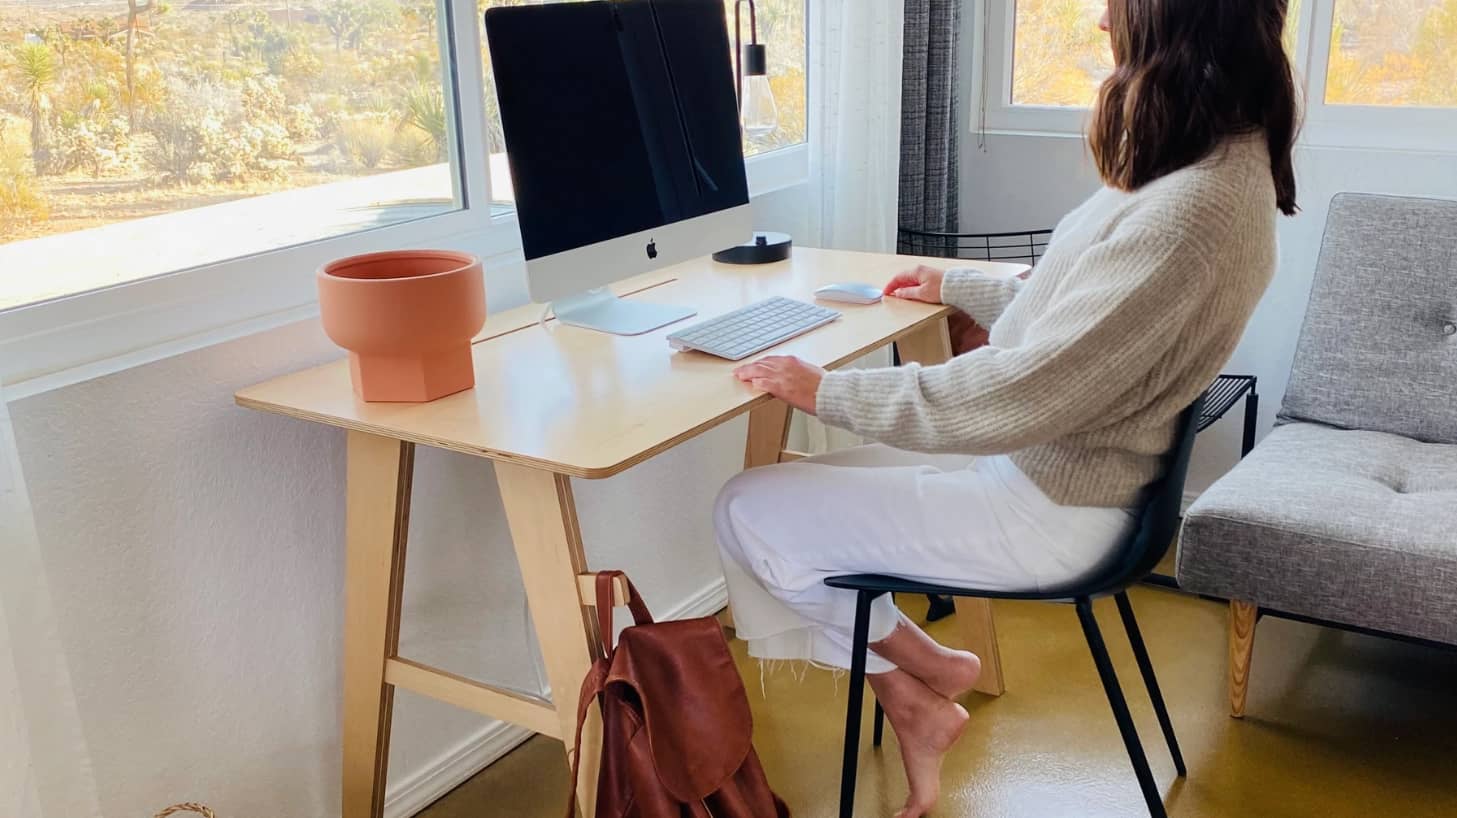 The Minimalist Desk That’s More Than Meets the Eye (from RLDH)